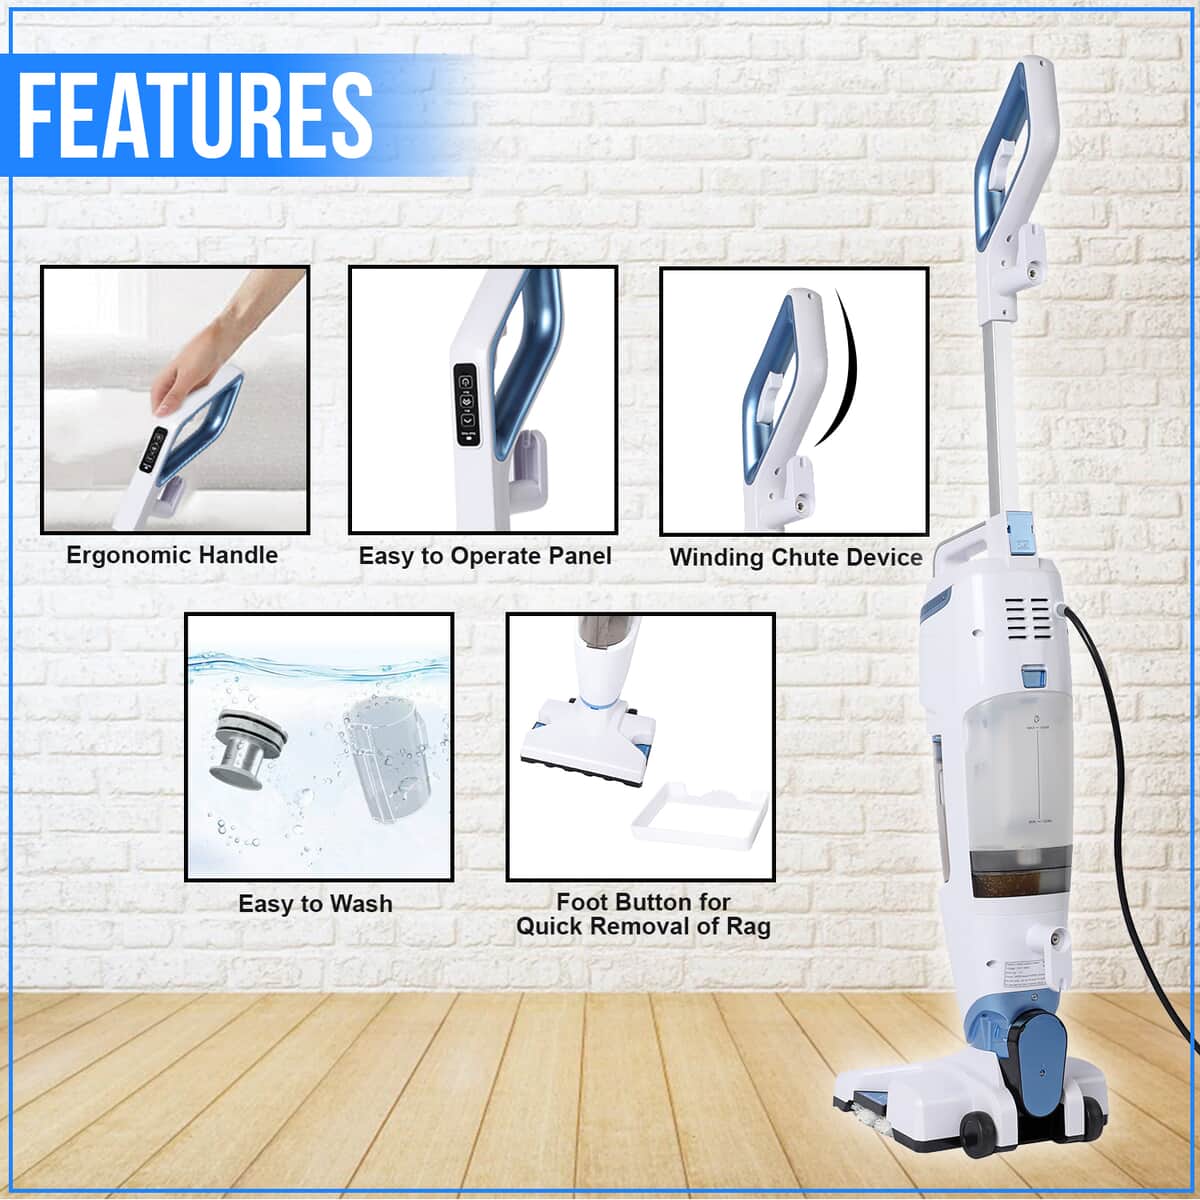 Steam Vacuum Cleaner with Carpet Glider, Multi Purpose Steam Cleaner For Home Kitchen Car Interior Uphoistery Cleaning, Vacuum Steamer image number 2